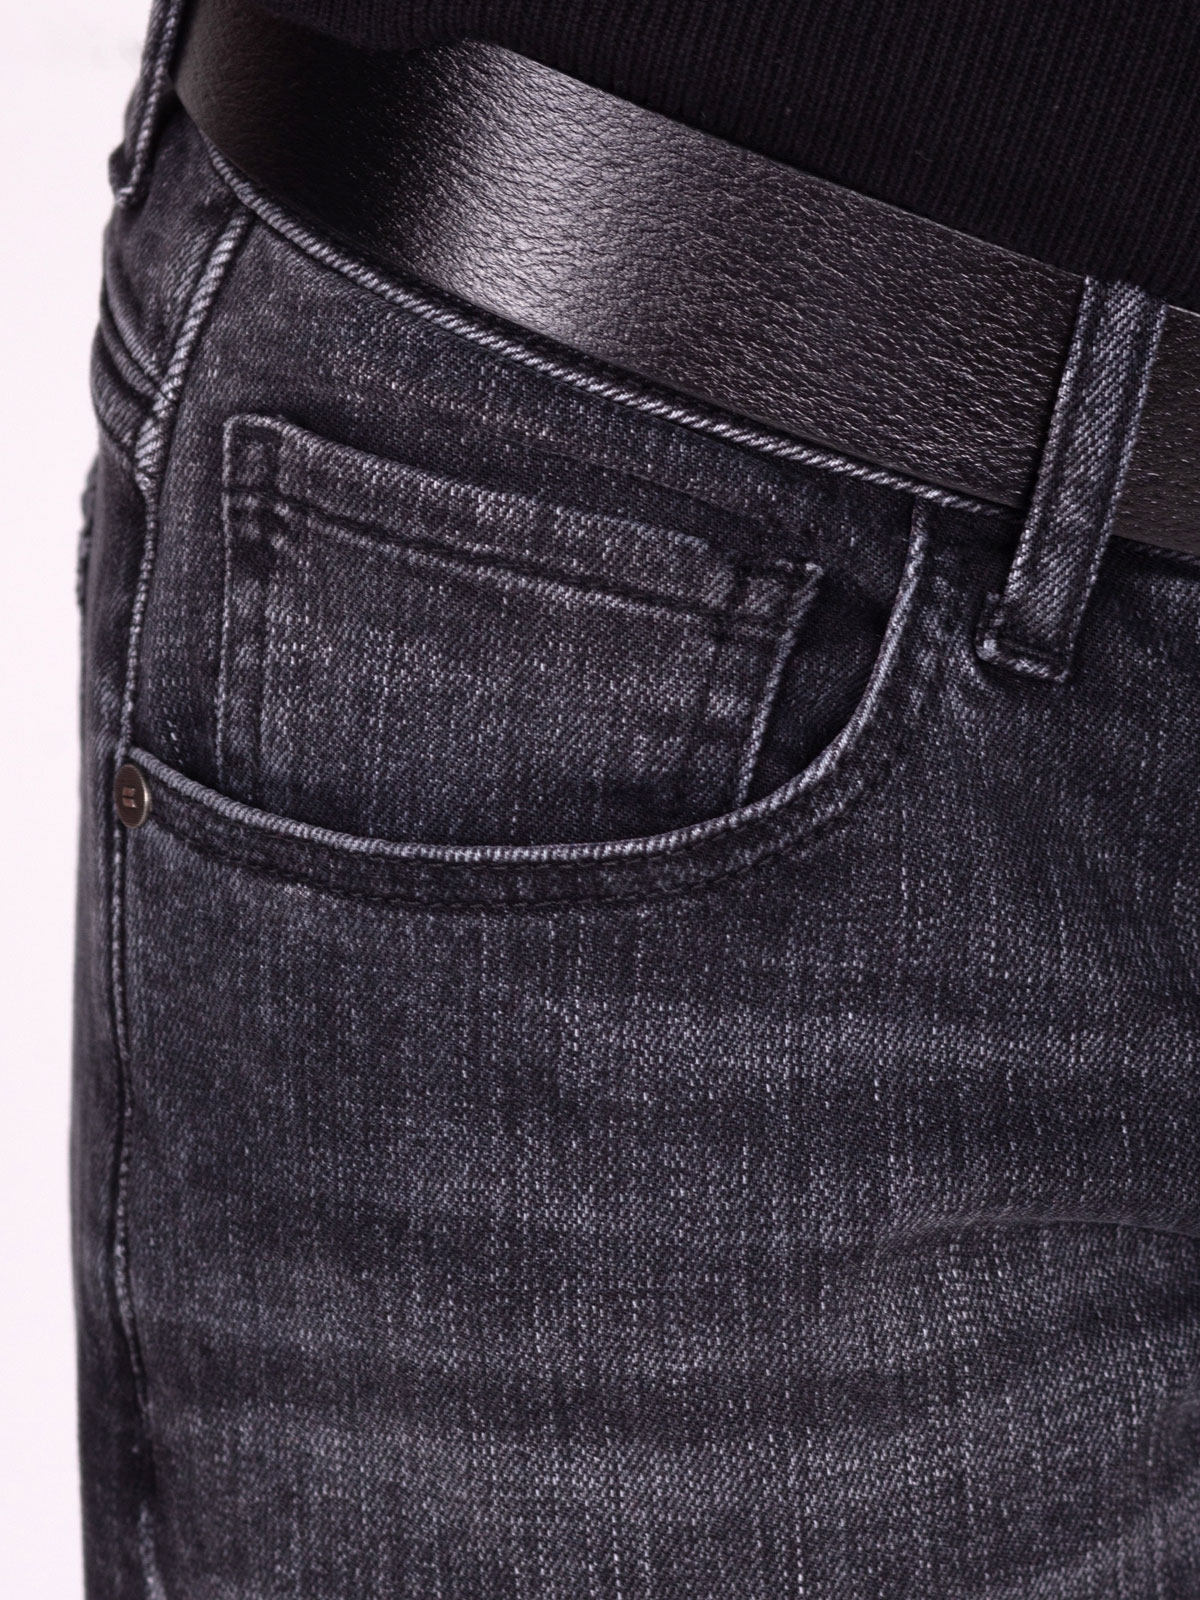 Black slim fit jeans with trit effect - 62160 € 78.18 img2